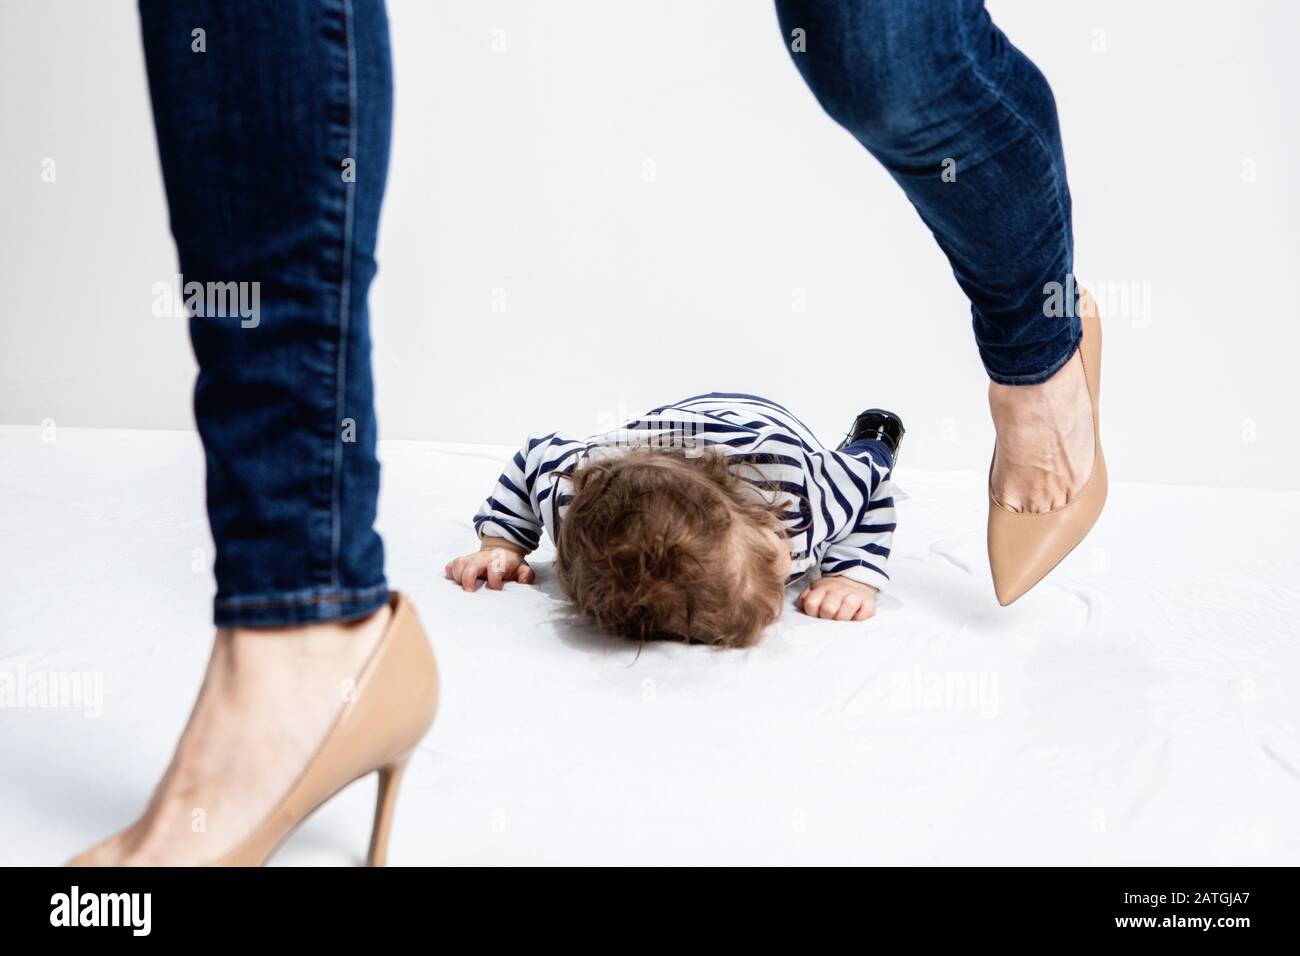 toddler throwing a tantrum laying on the floor with mother walking away angry and frustrated Stock Photo